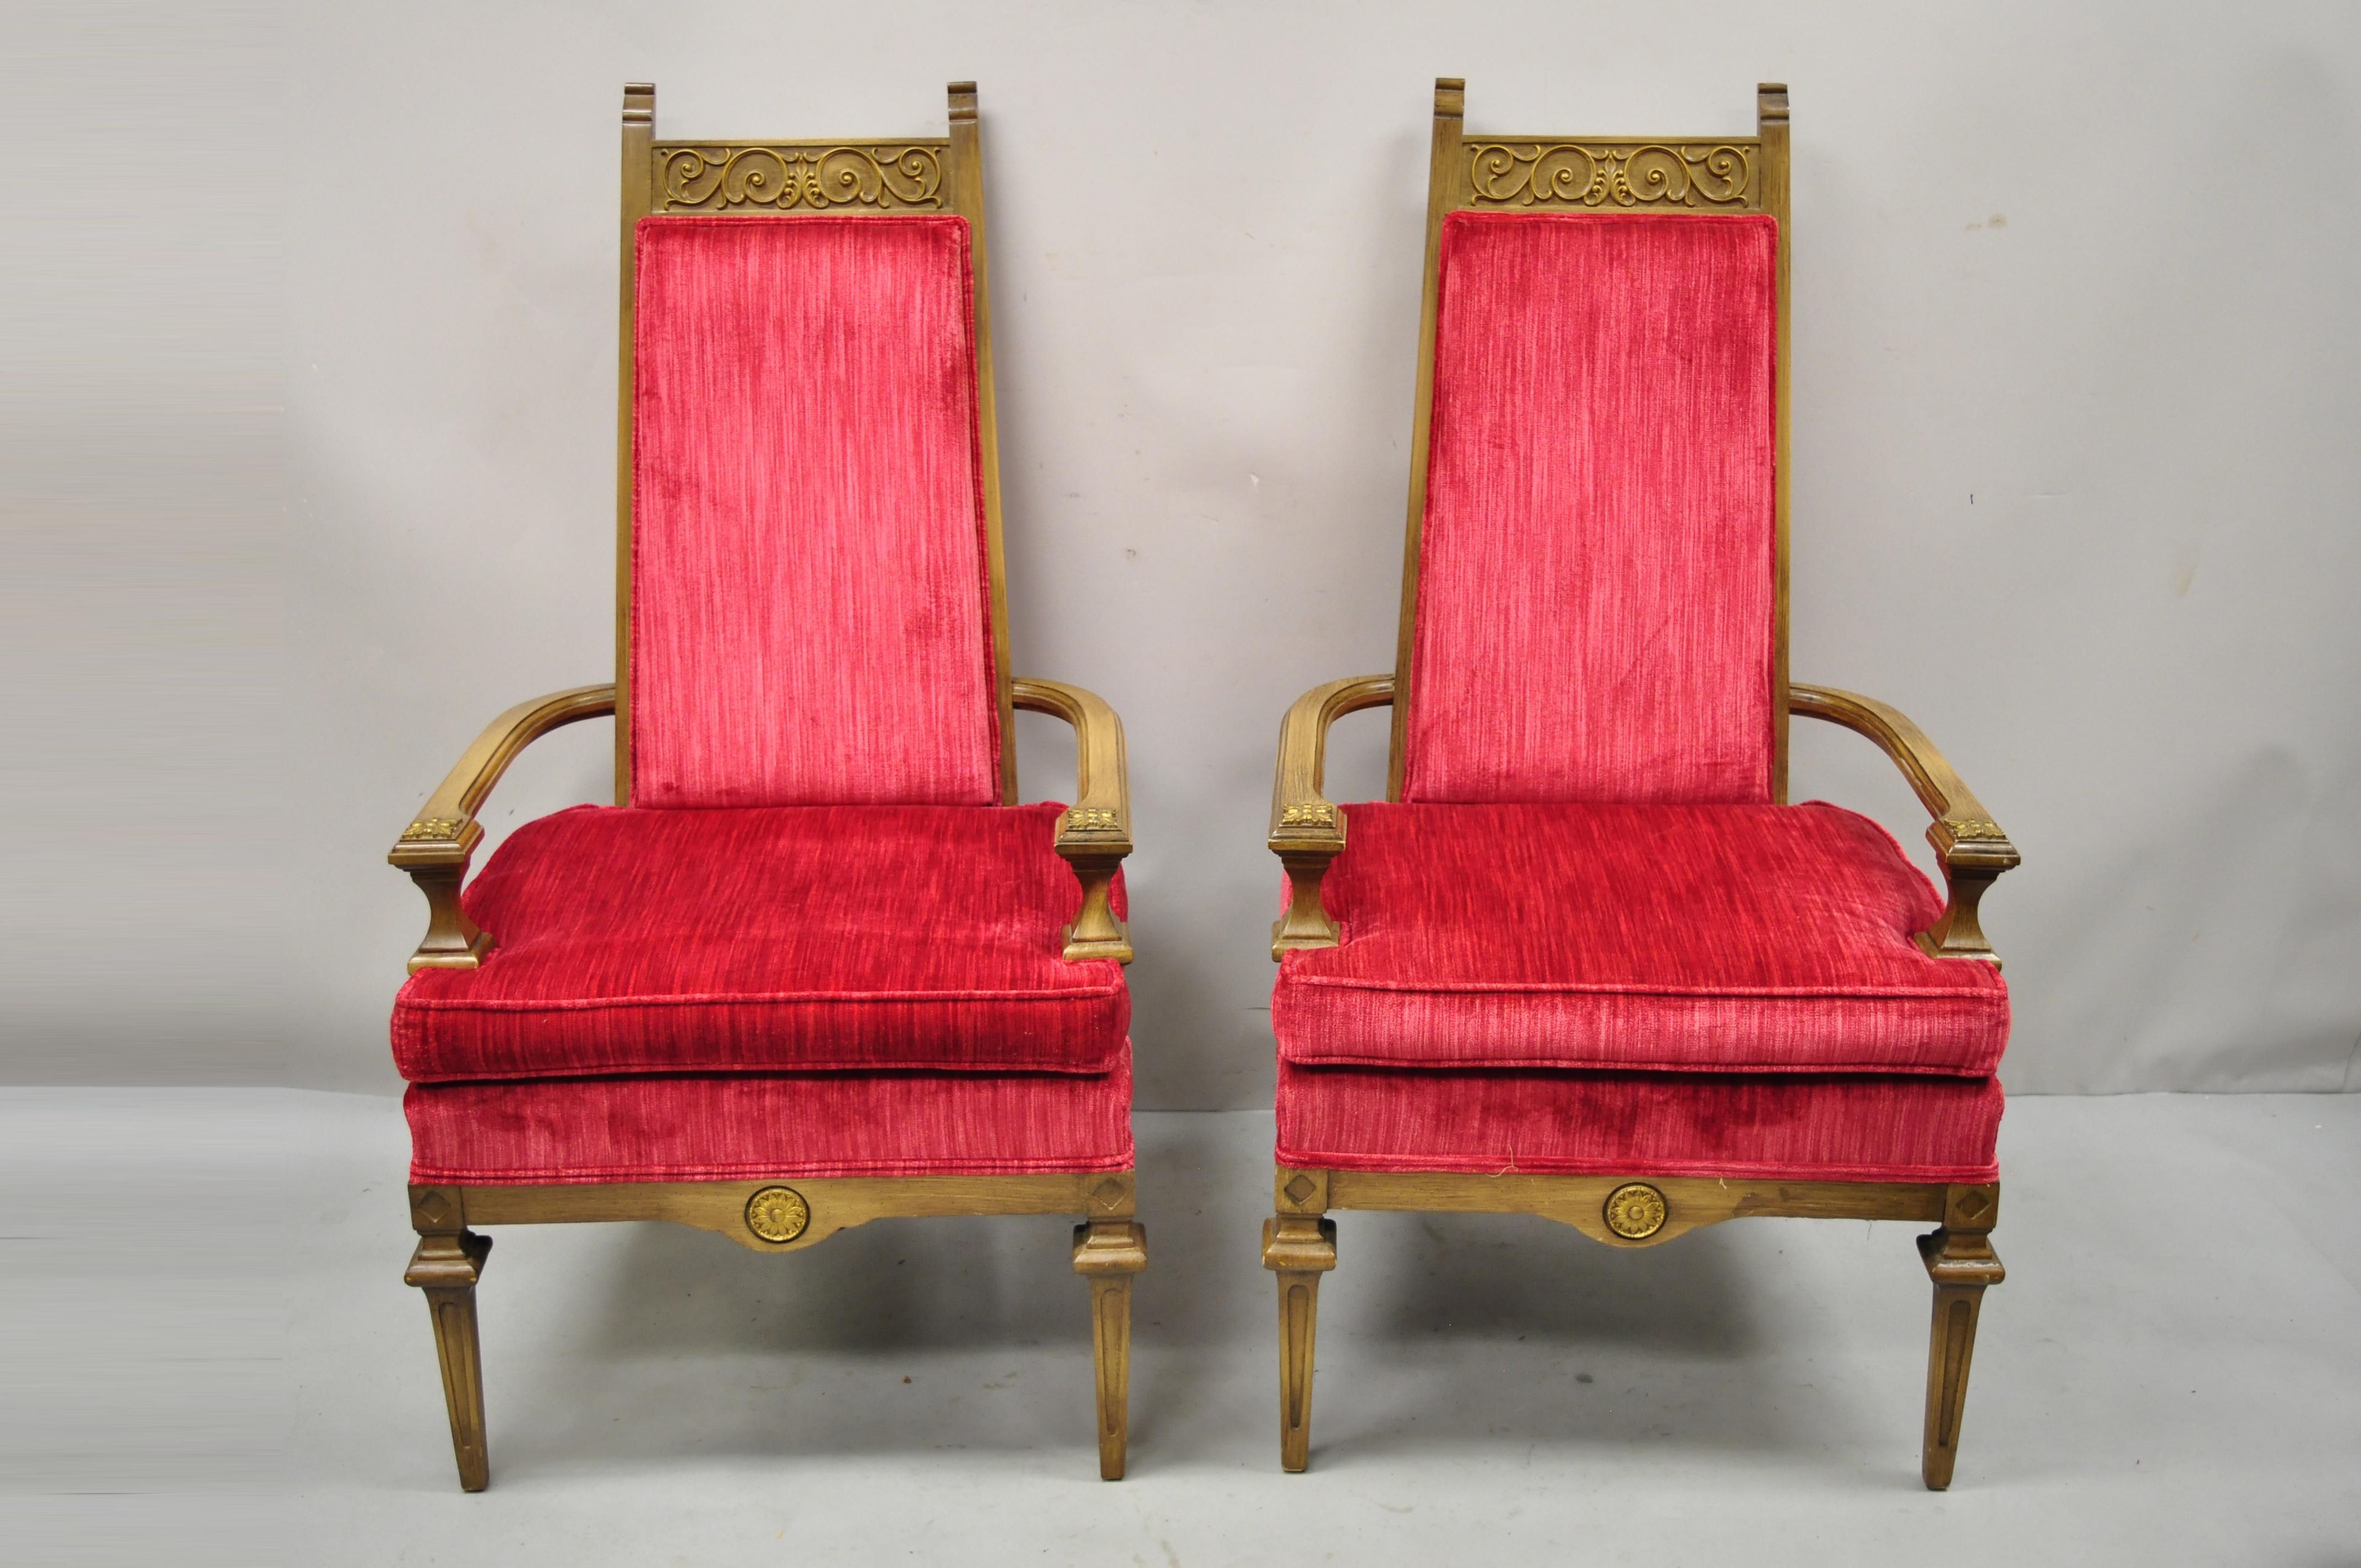 Vintage Italian style Hollywood Regency red high back lounge arm chairs - a pair. Item features solid wood frames, nicely carved details, very nice vintage pair, great style and form. Circa Mid 20th Century. Measurements: 49